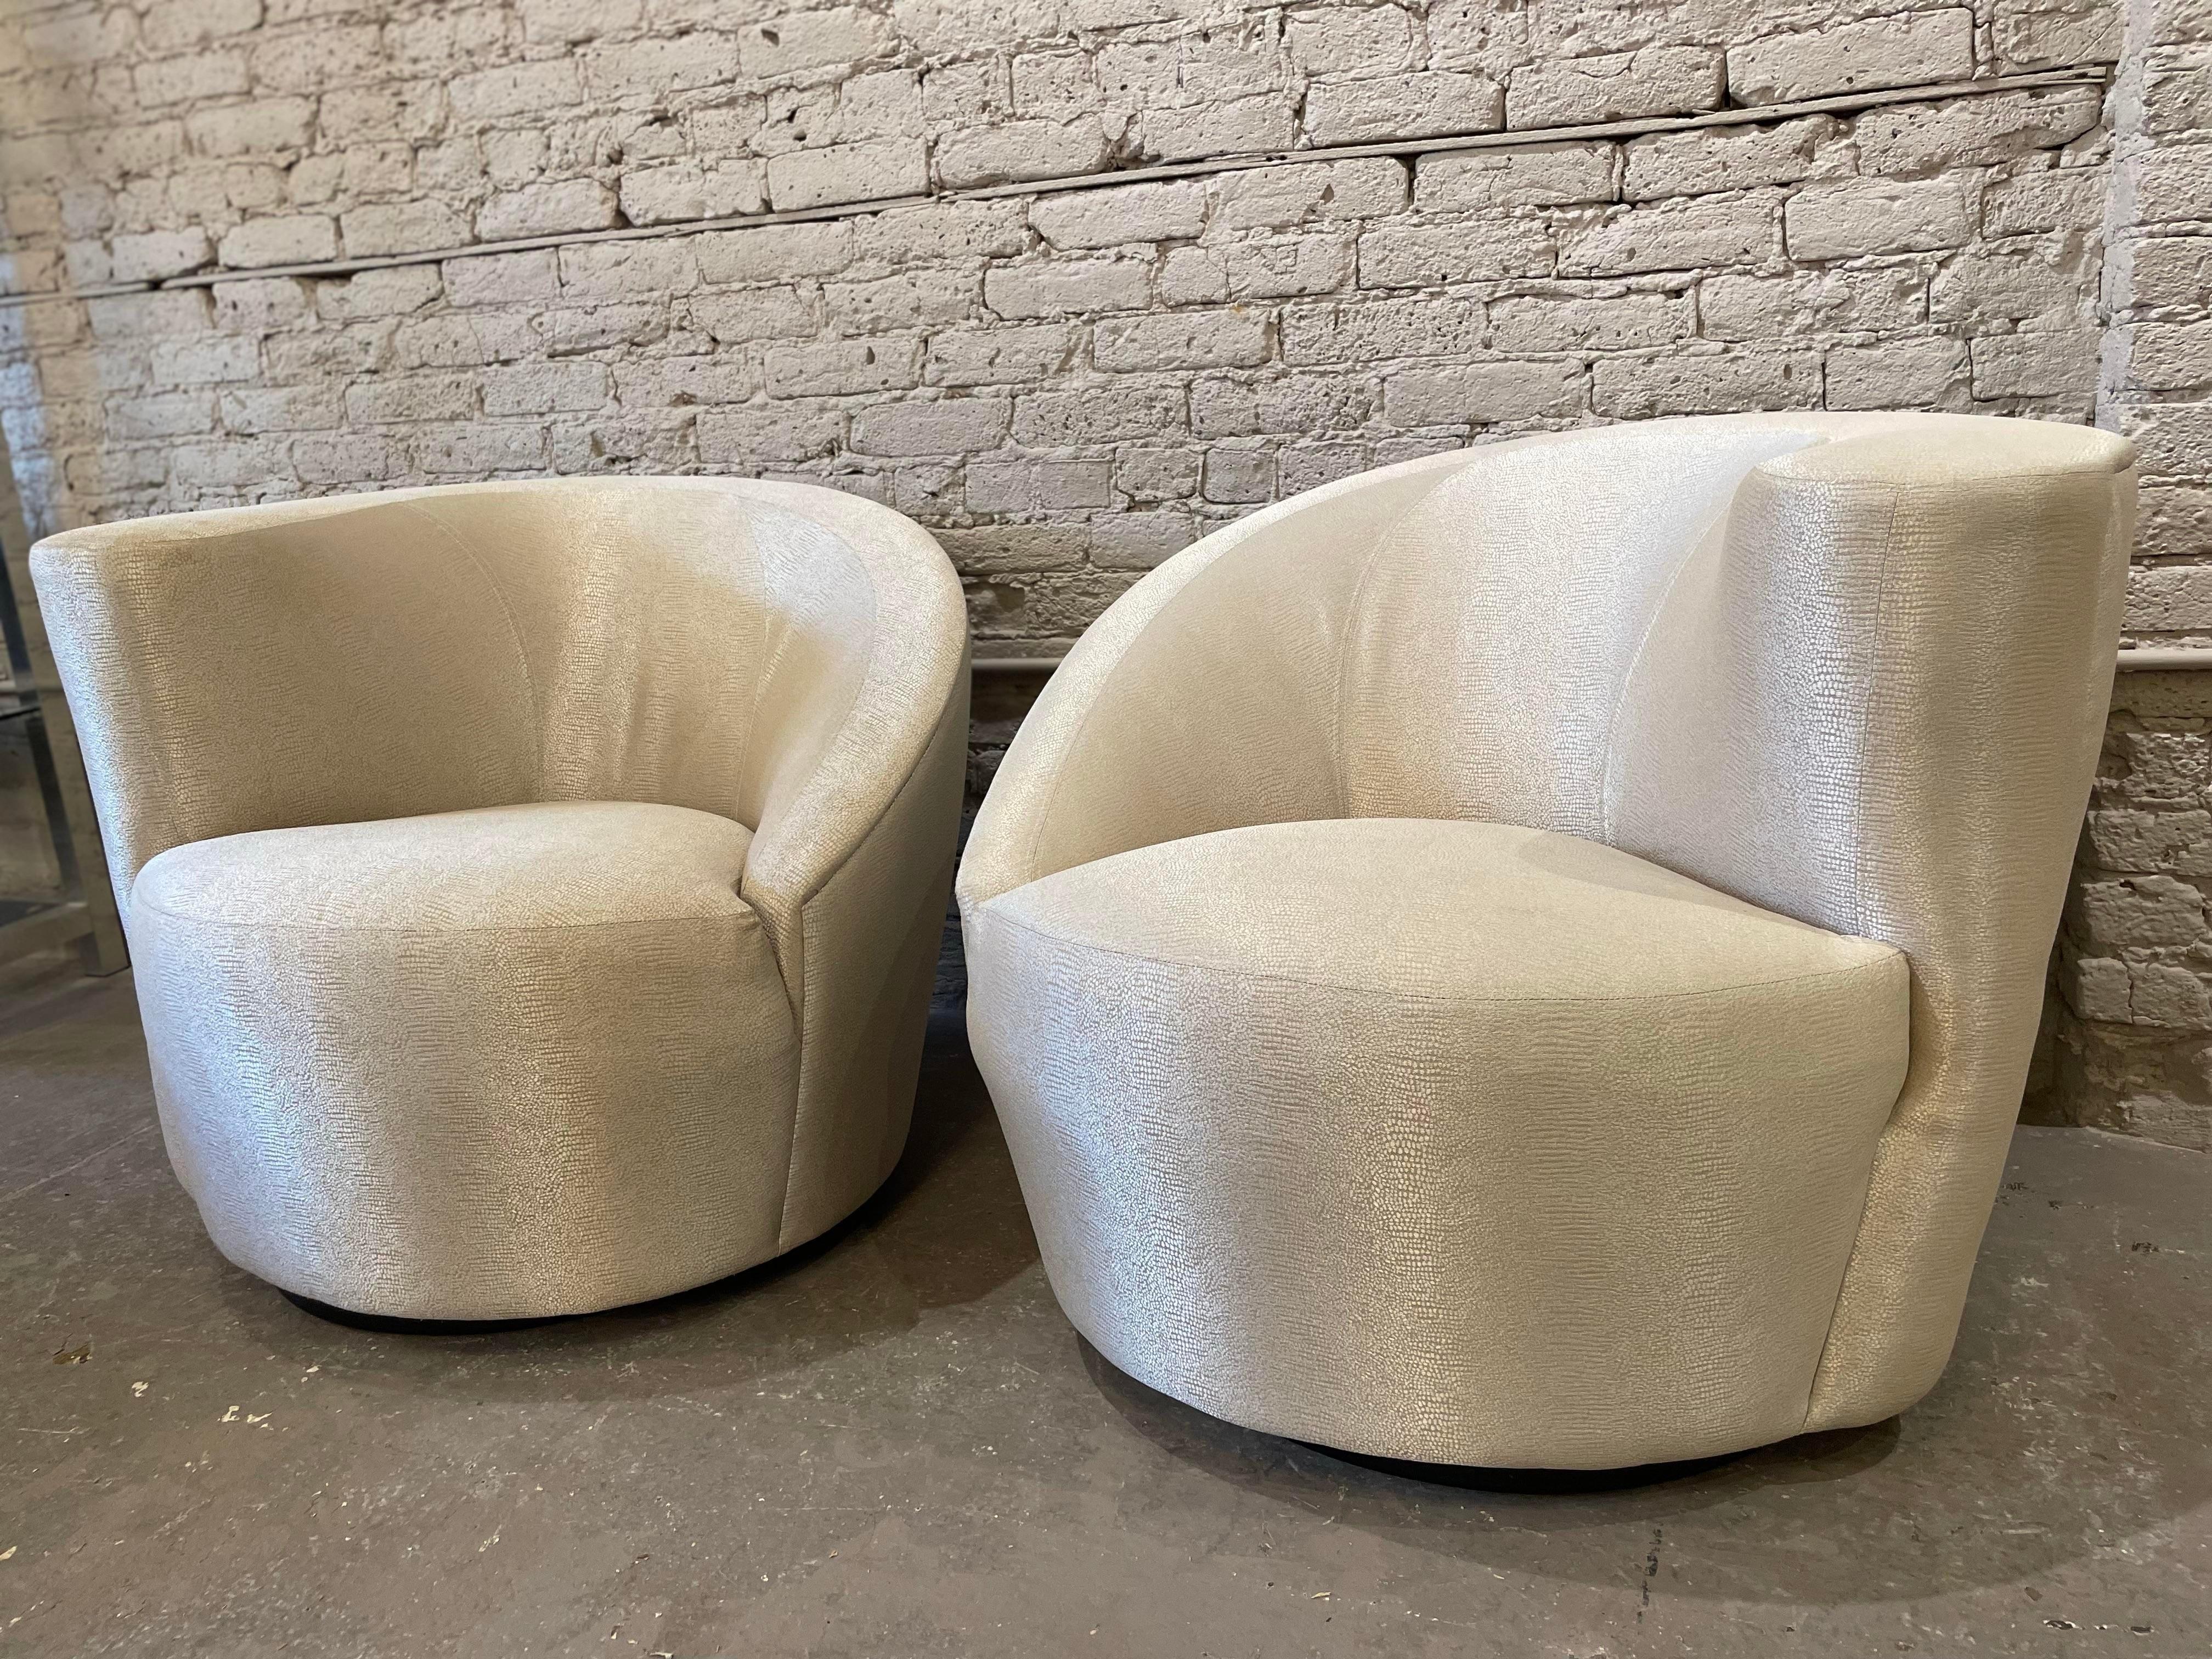 Late 20th Century 1970s Kagan Directional Nautilus Swivel Chairs Vintage - a Pair For Sale